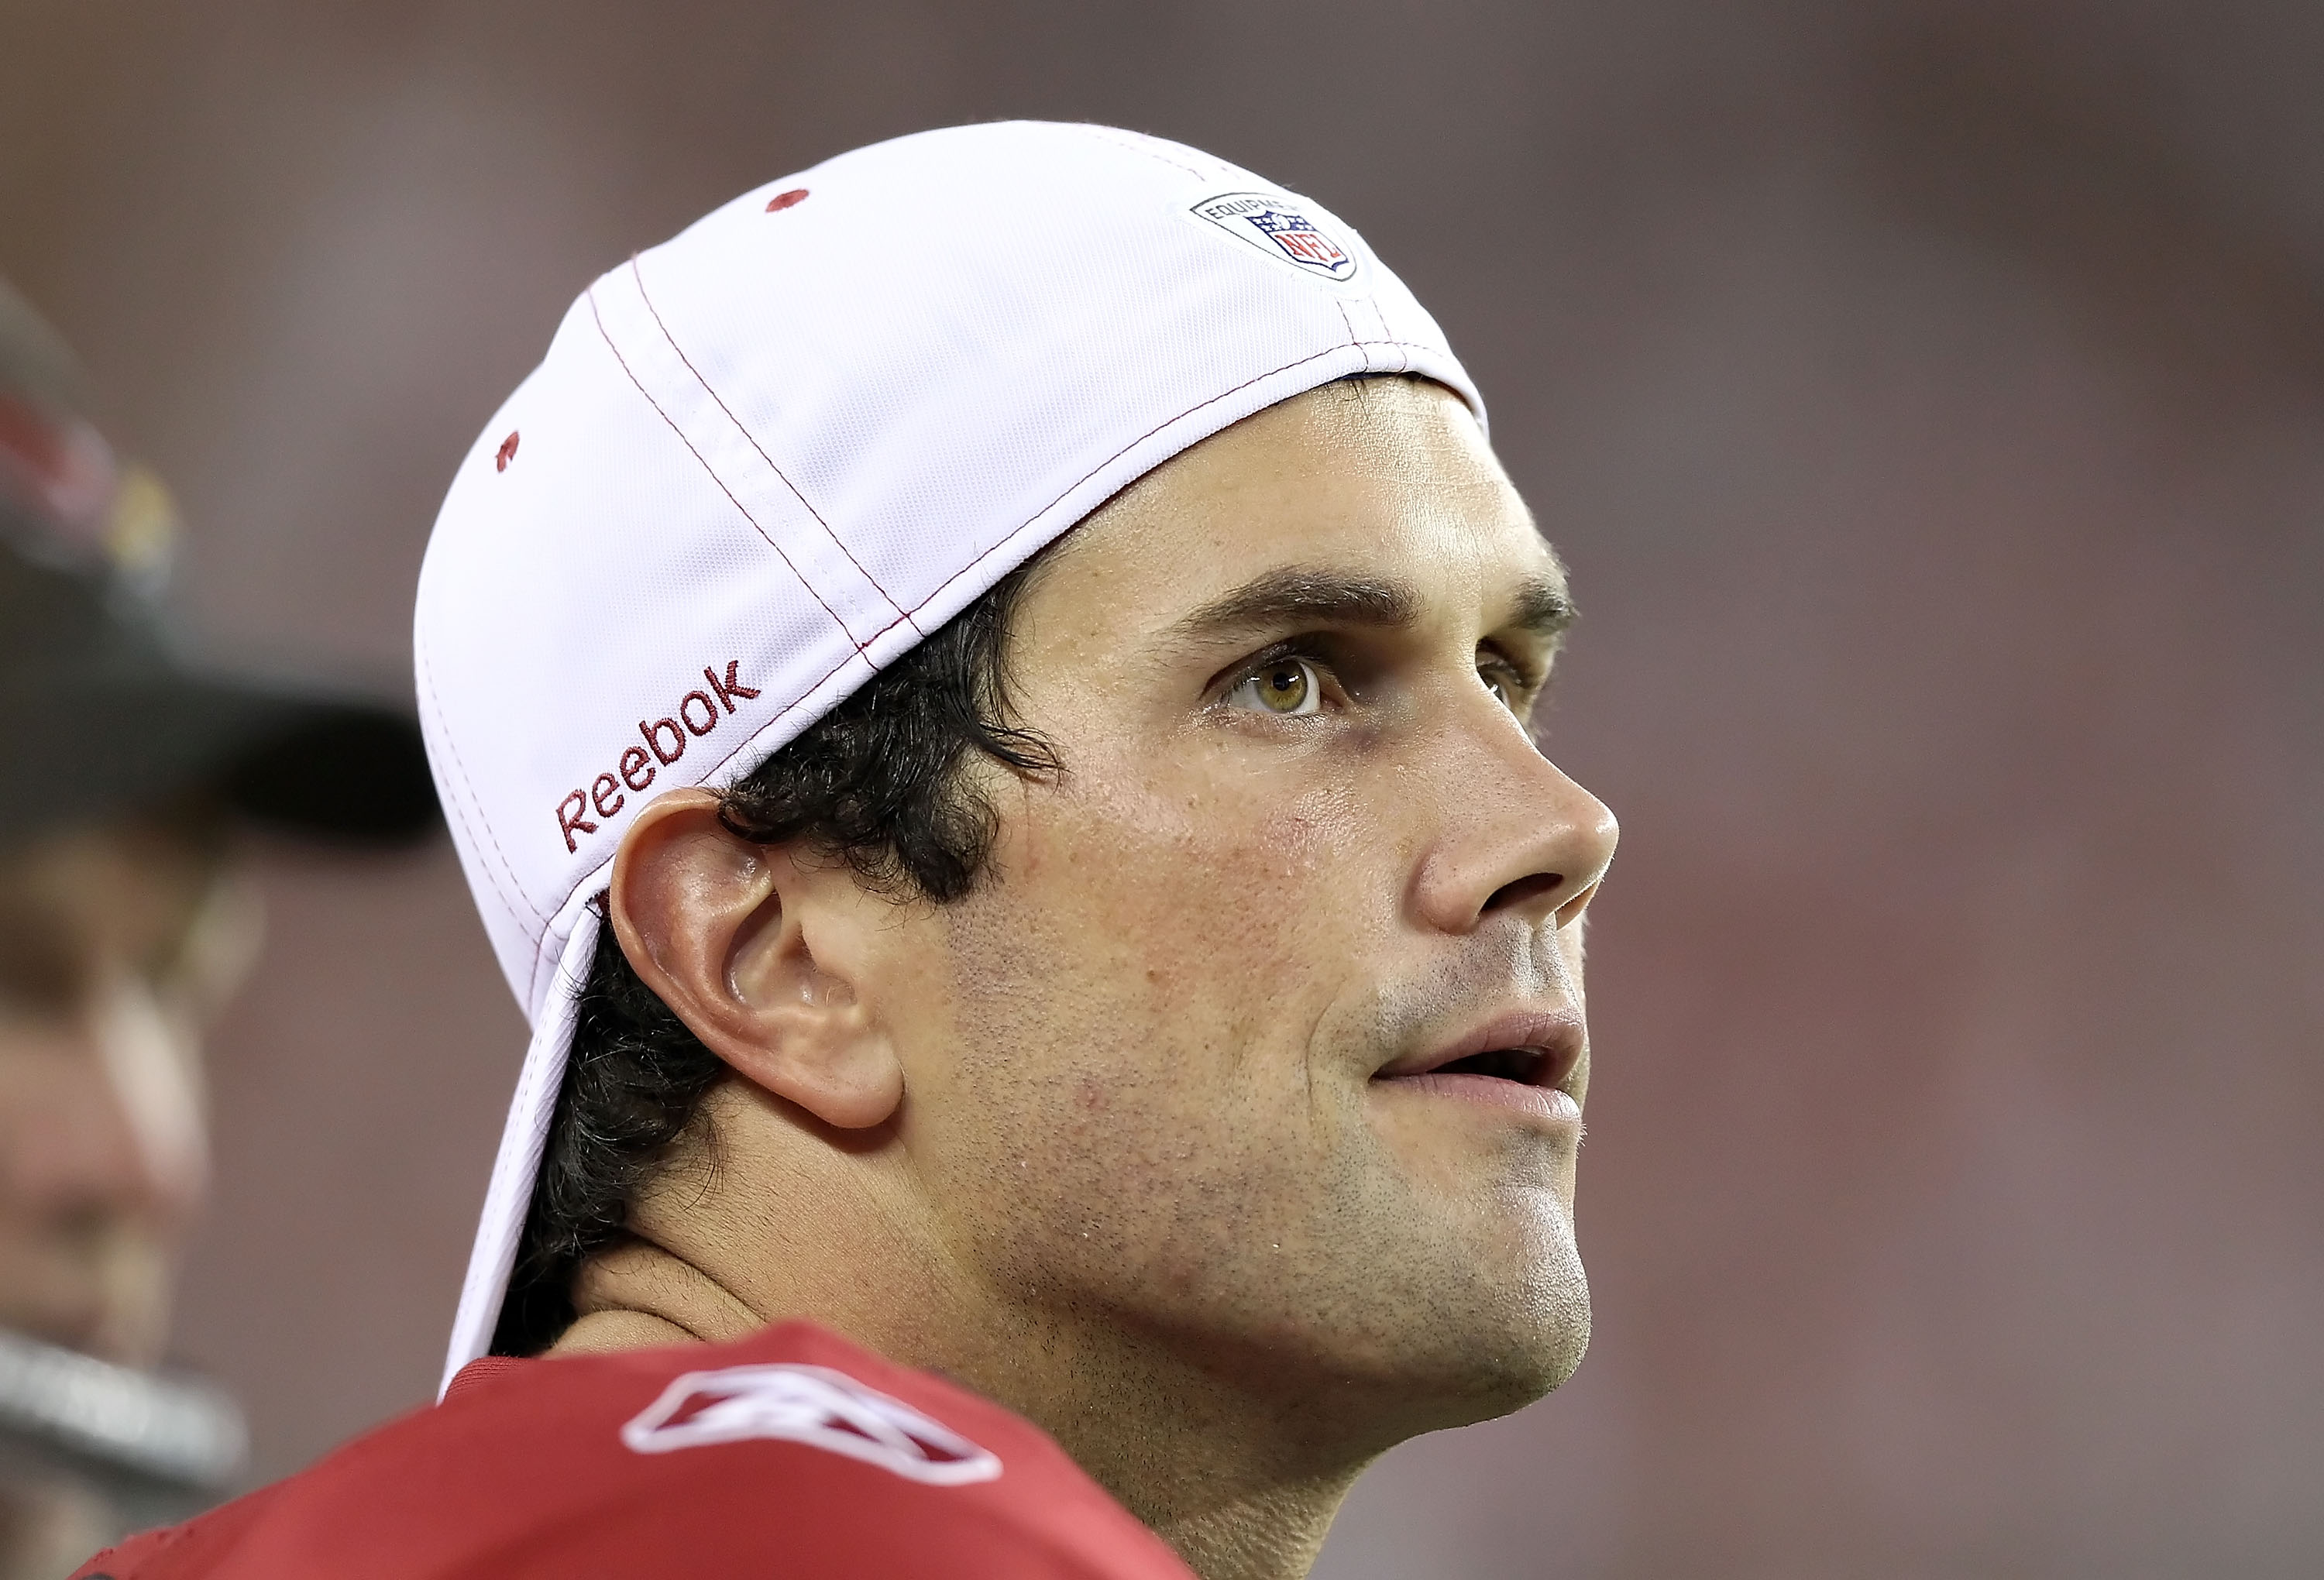 GLENDALE, AZ - AUGUST 14:  Quarterback Matt Leinart #7 of the Arizona Cardinals watches from the sidelines during preseason NFL game against the Houston Texans at the University of Phoenix Stadium on August 14, 2010 in Glendale, Arizona. The Cardinals def